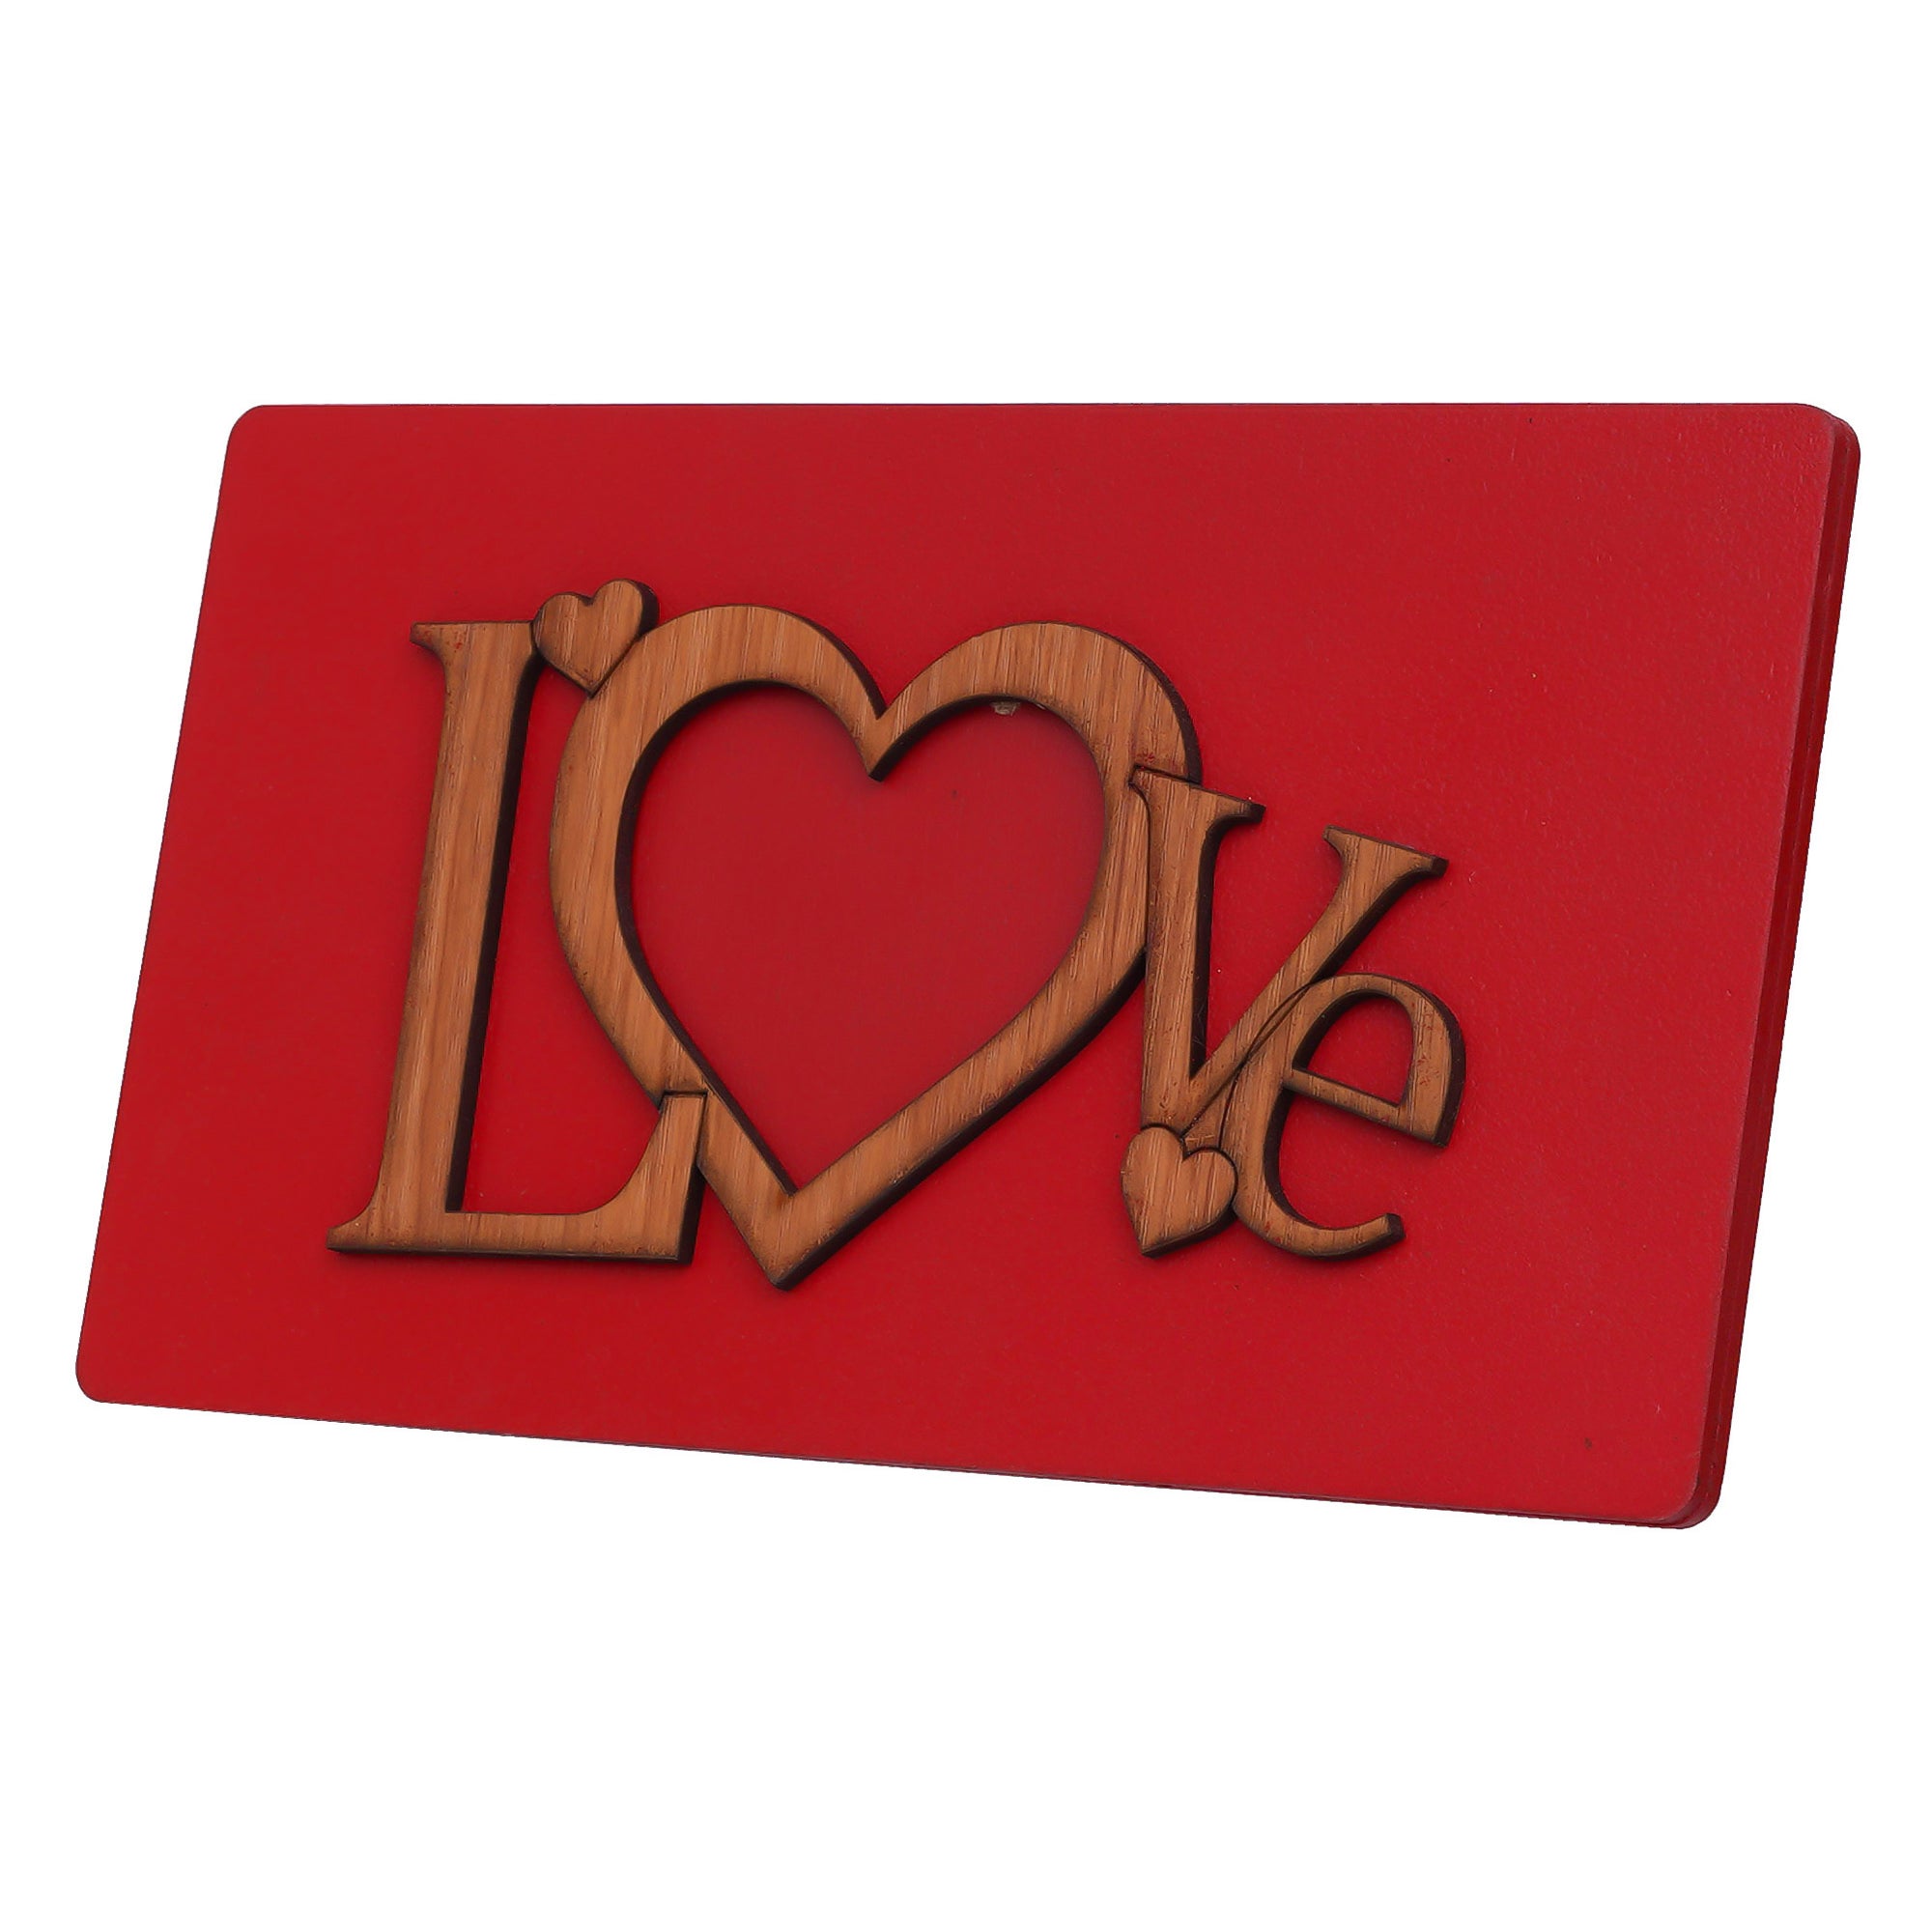 Valentine Combo of "Love" Wooden Photo Frame With Red Stand, Red Heart Shaped Gift Box 7